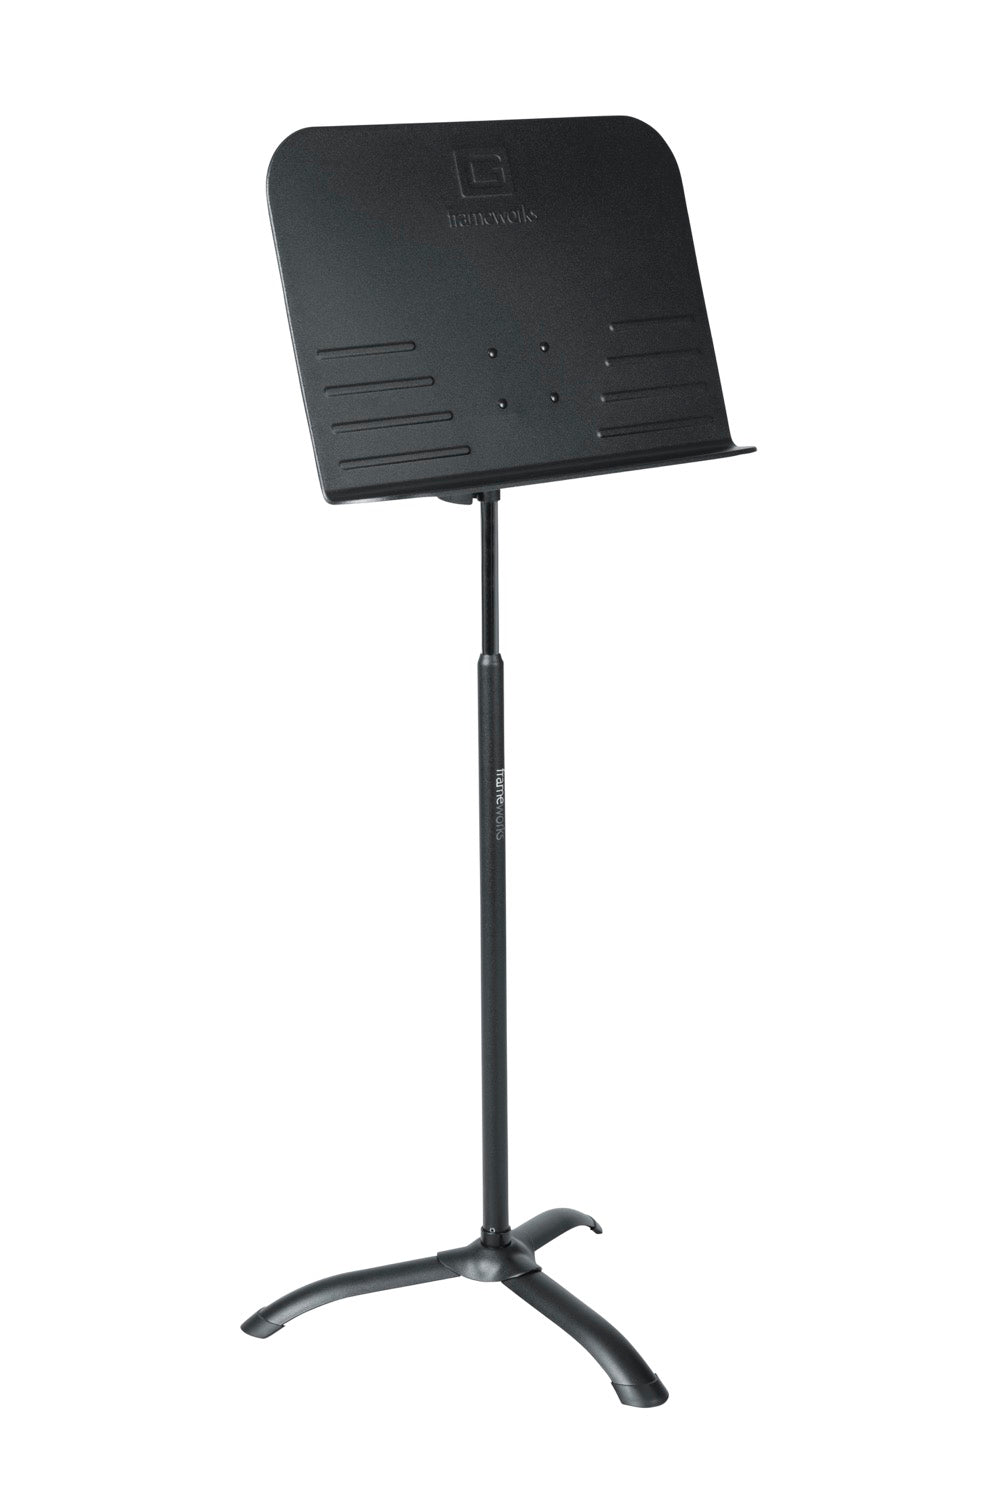 Gator Frameworks GFW-MUS-1000 Deluxe Music Stand